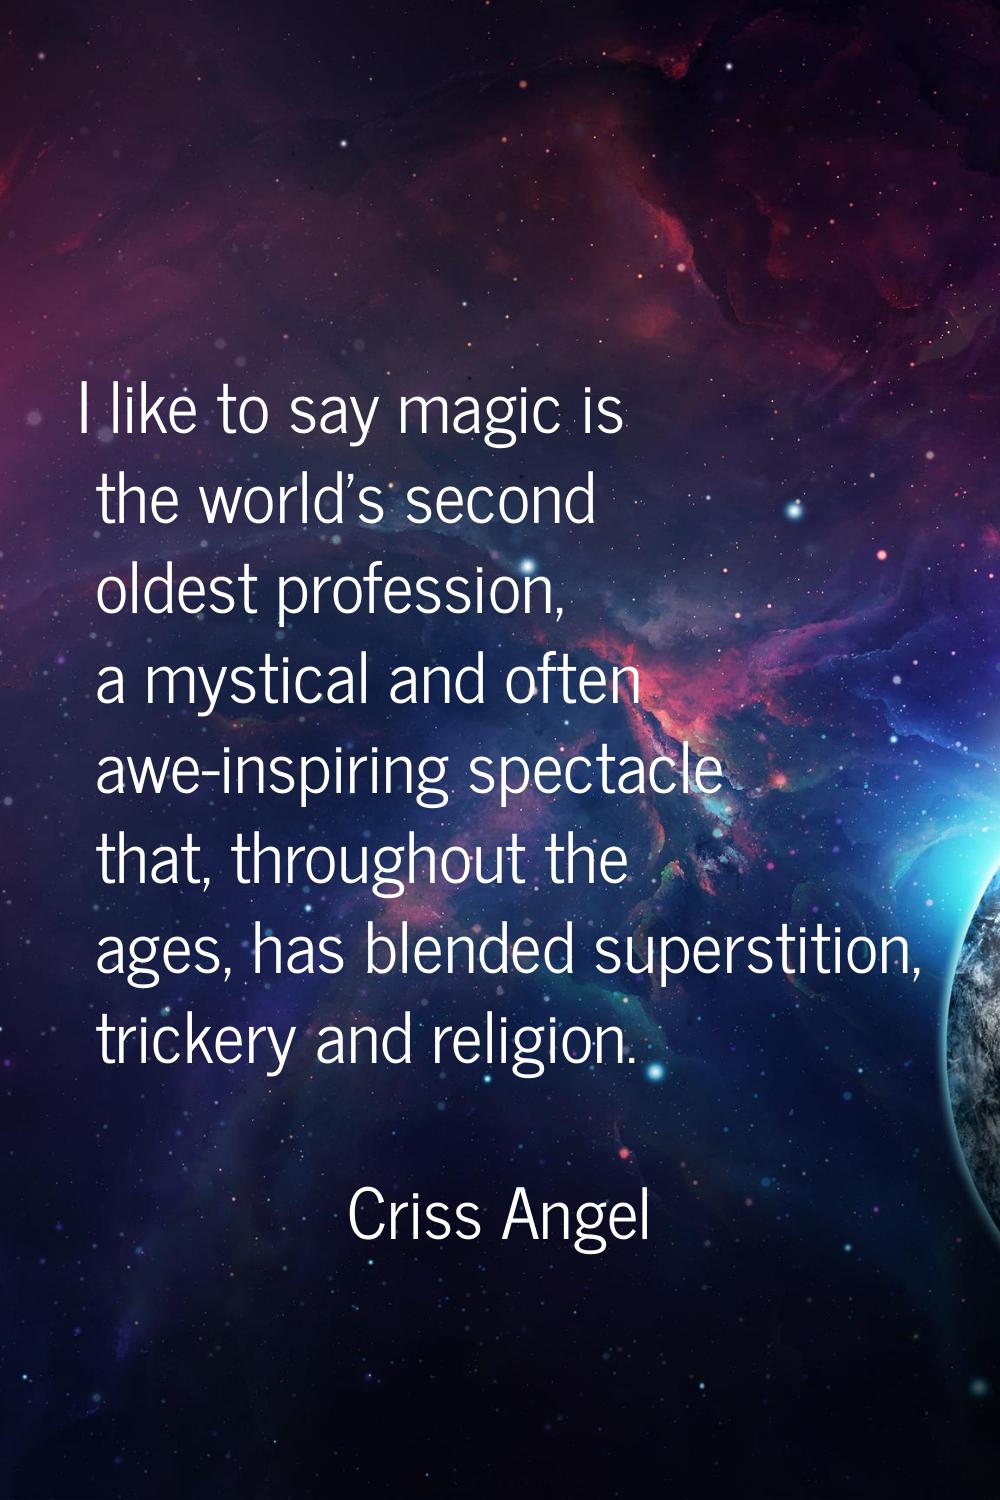 I like to say magic is the world's second oldest profession, a mystical and often awe-inspiring spe